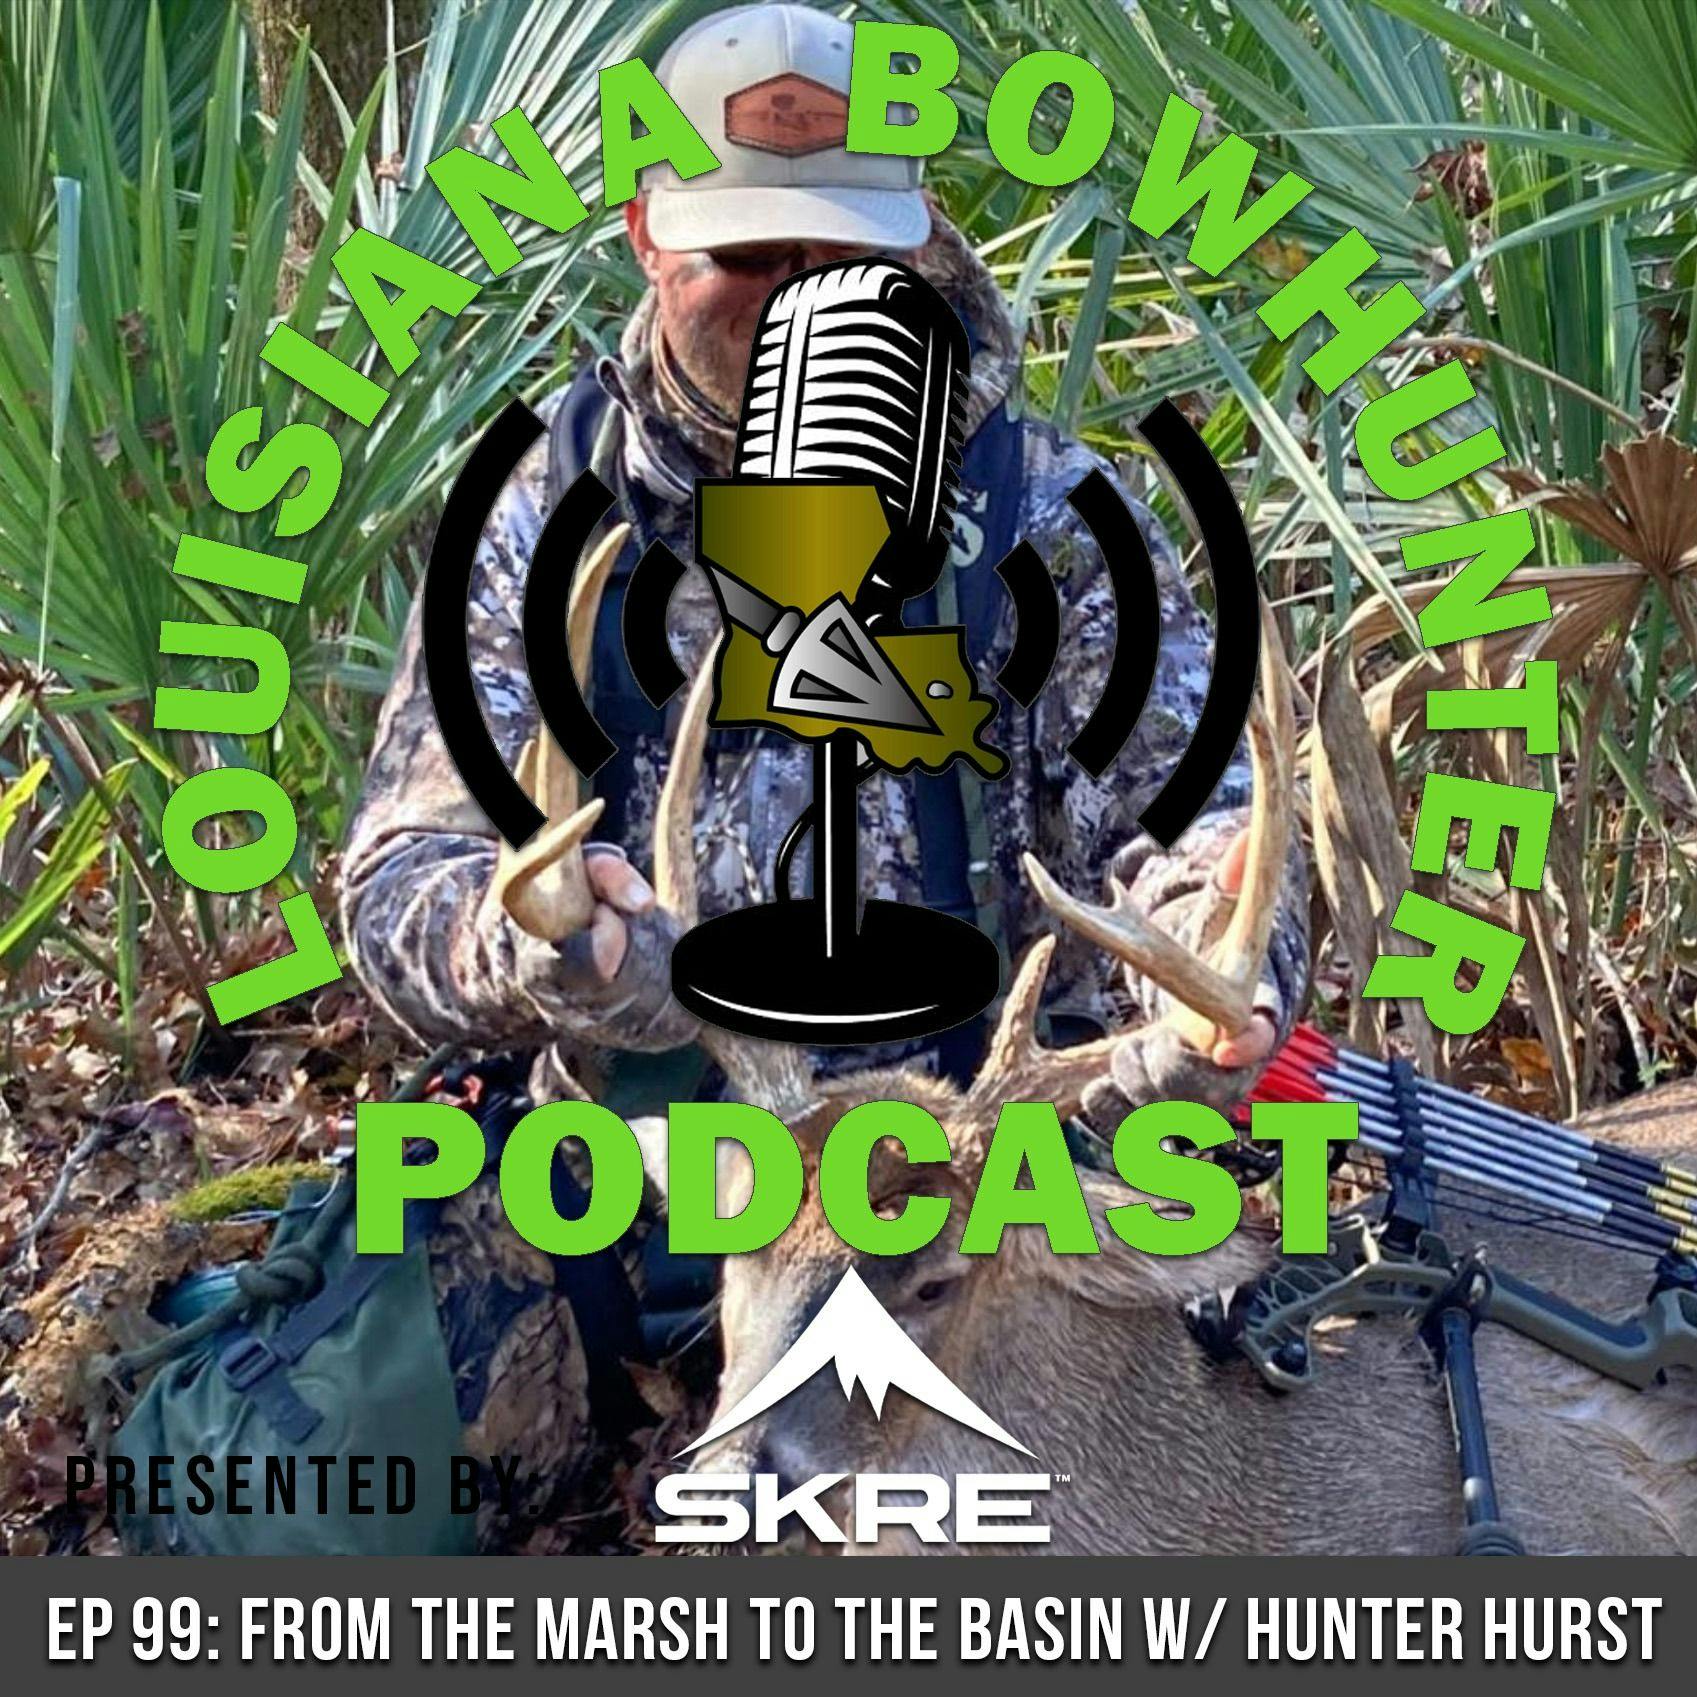 Episode 99: From the Marsh to the Basin w/ Hunter Hurst